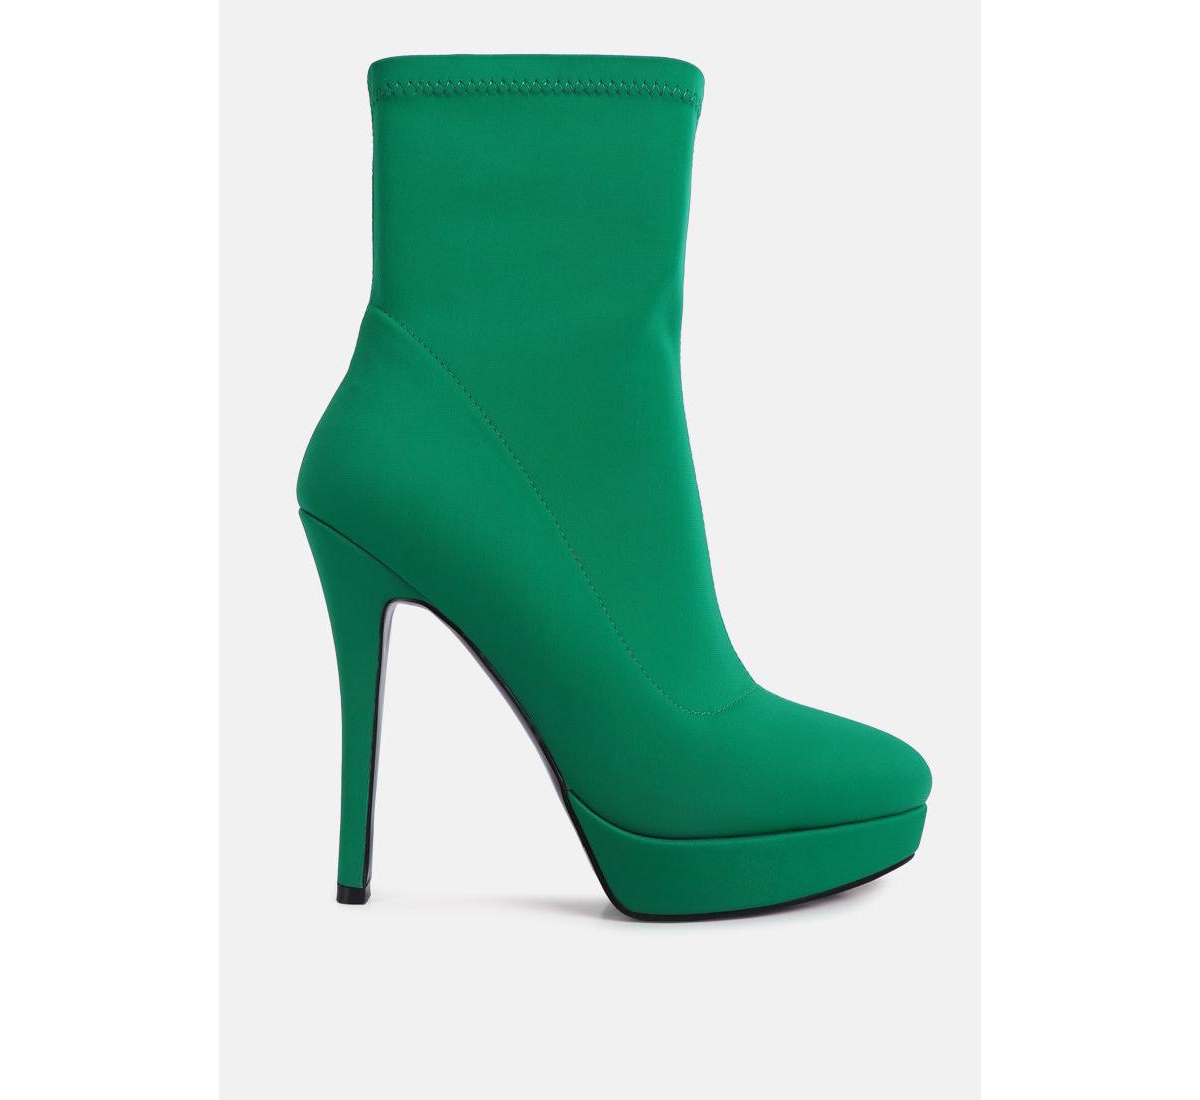 patotie lycra high heel ankle boots - Green